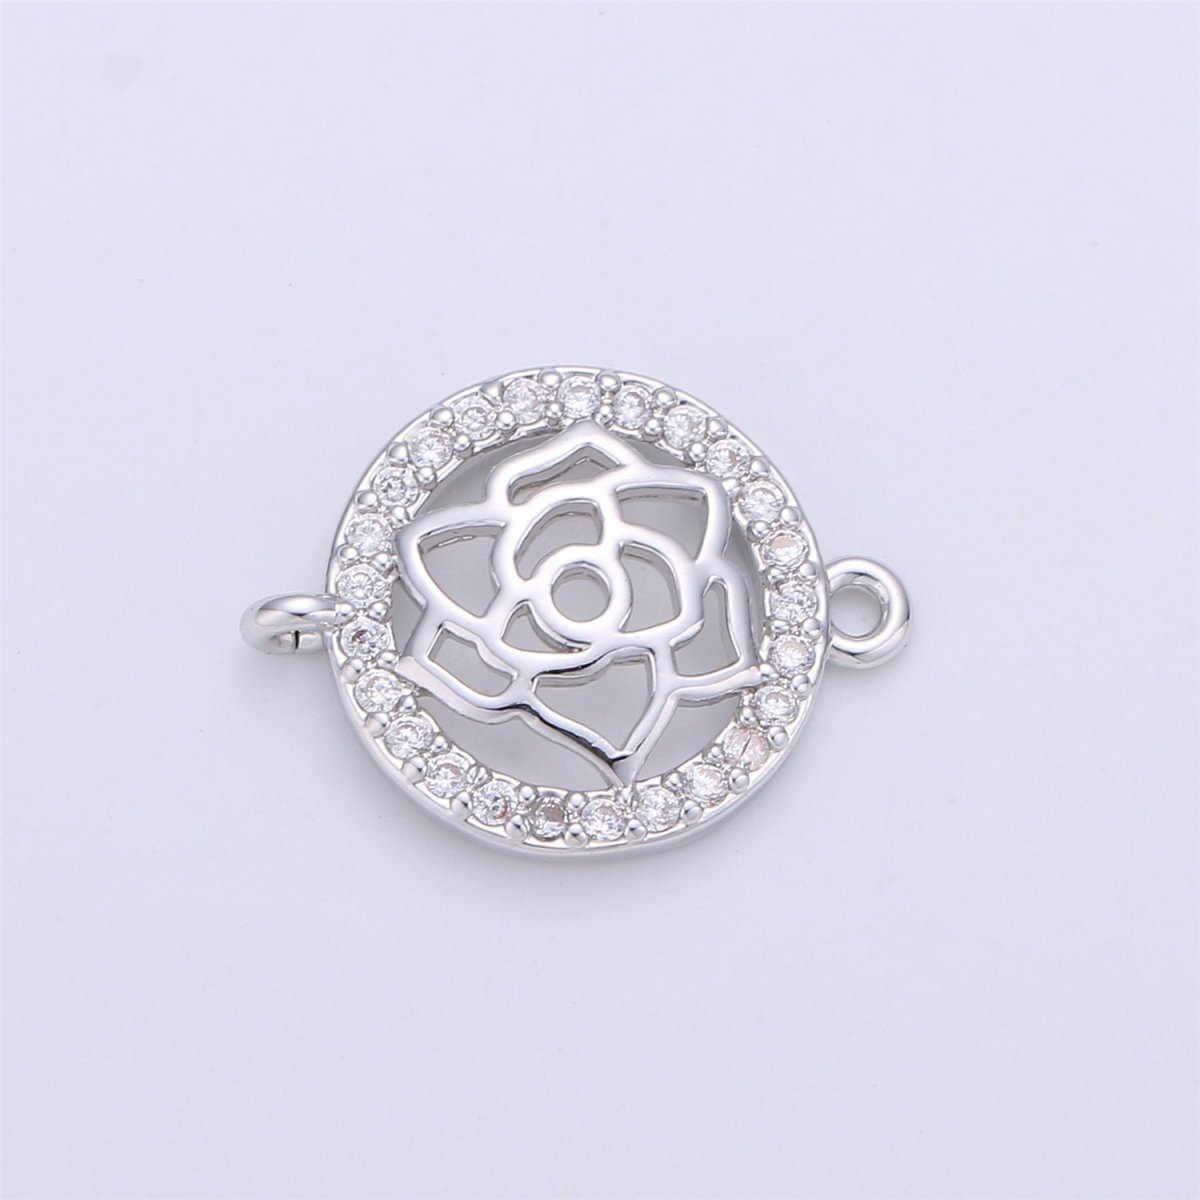 Micro Pave Dainty Rose Connectors Filigree Flower Charms in 14K Gold Filled for Bracelet Jewelry Supplies Component F-325 - DLUXCA